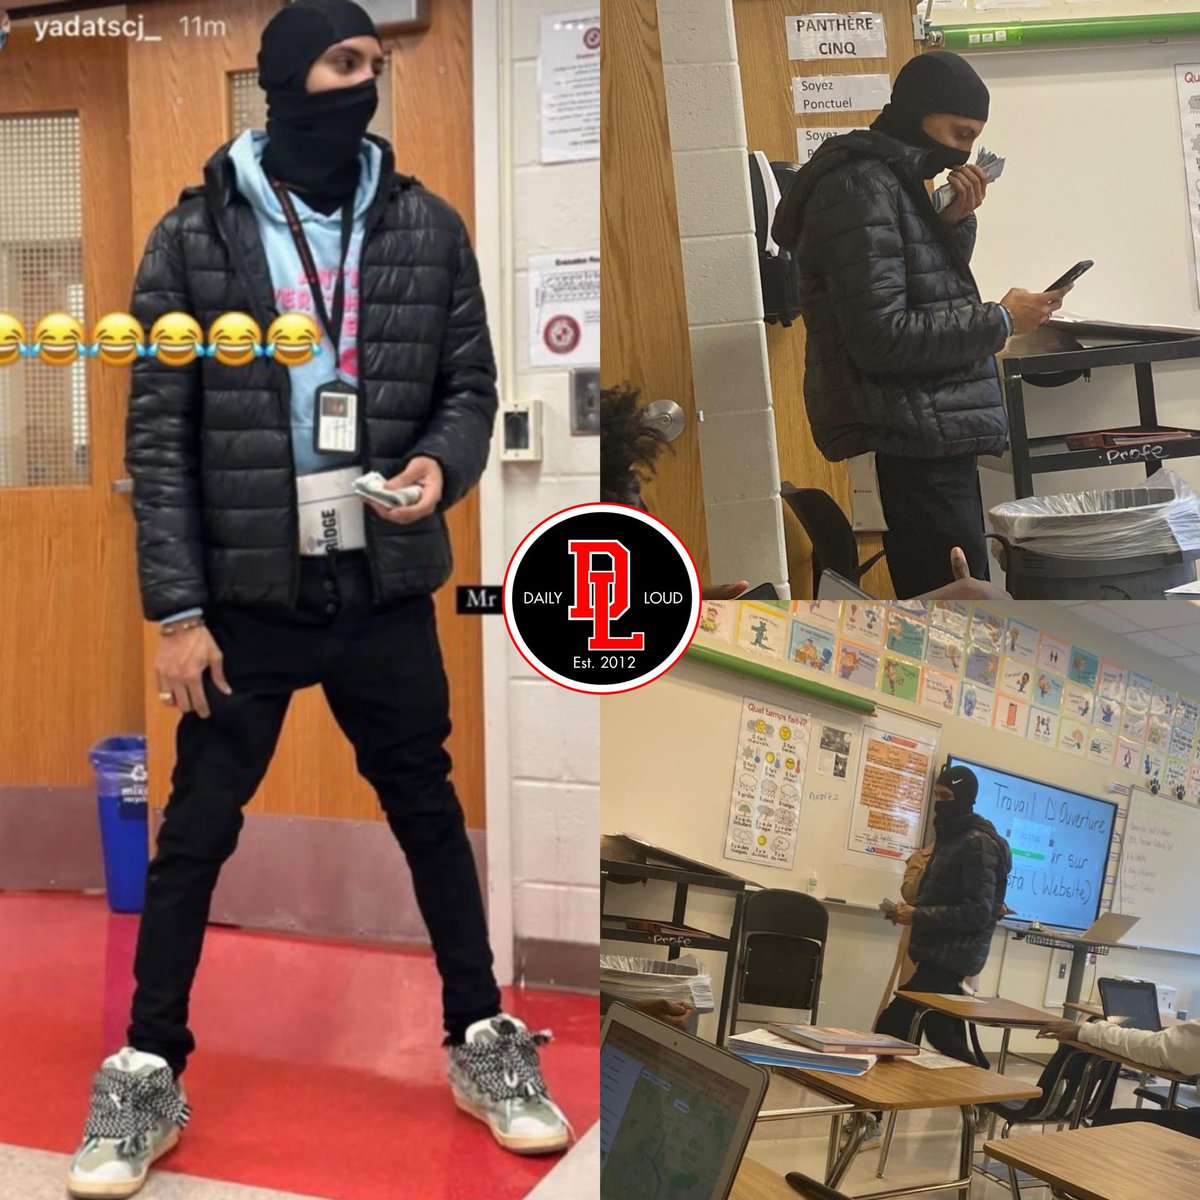 This school had a “Dress As Students Day” event for the teachers and one teacher had this outfit on.